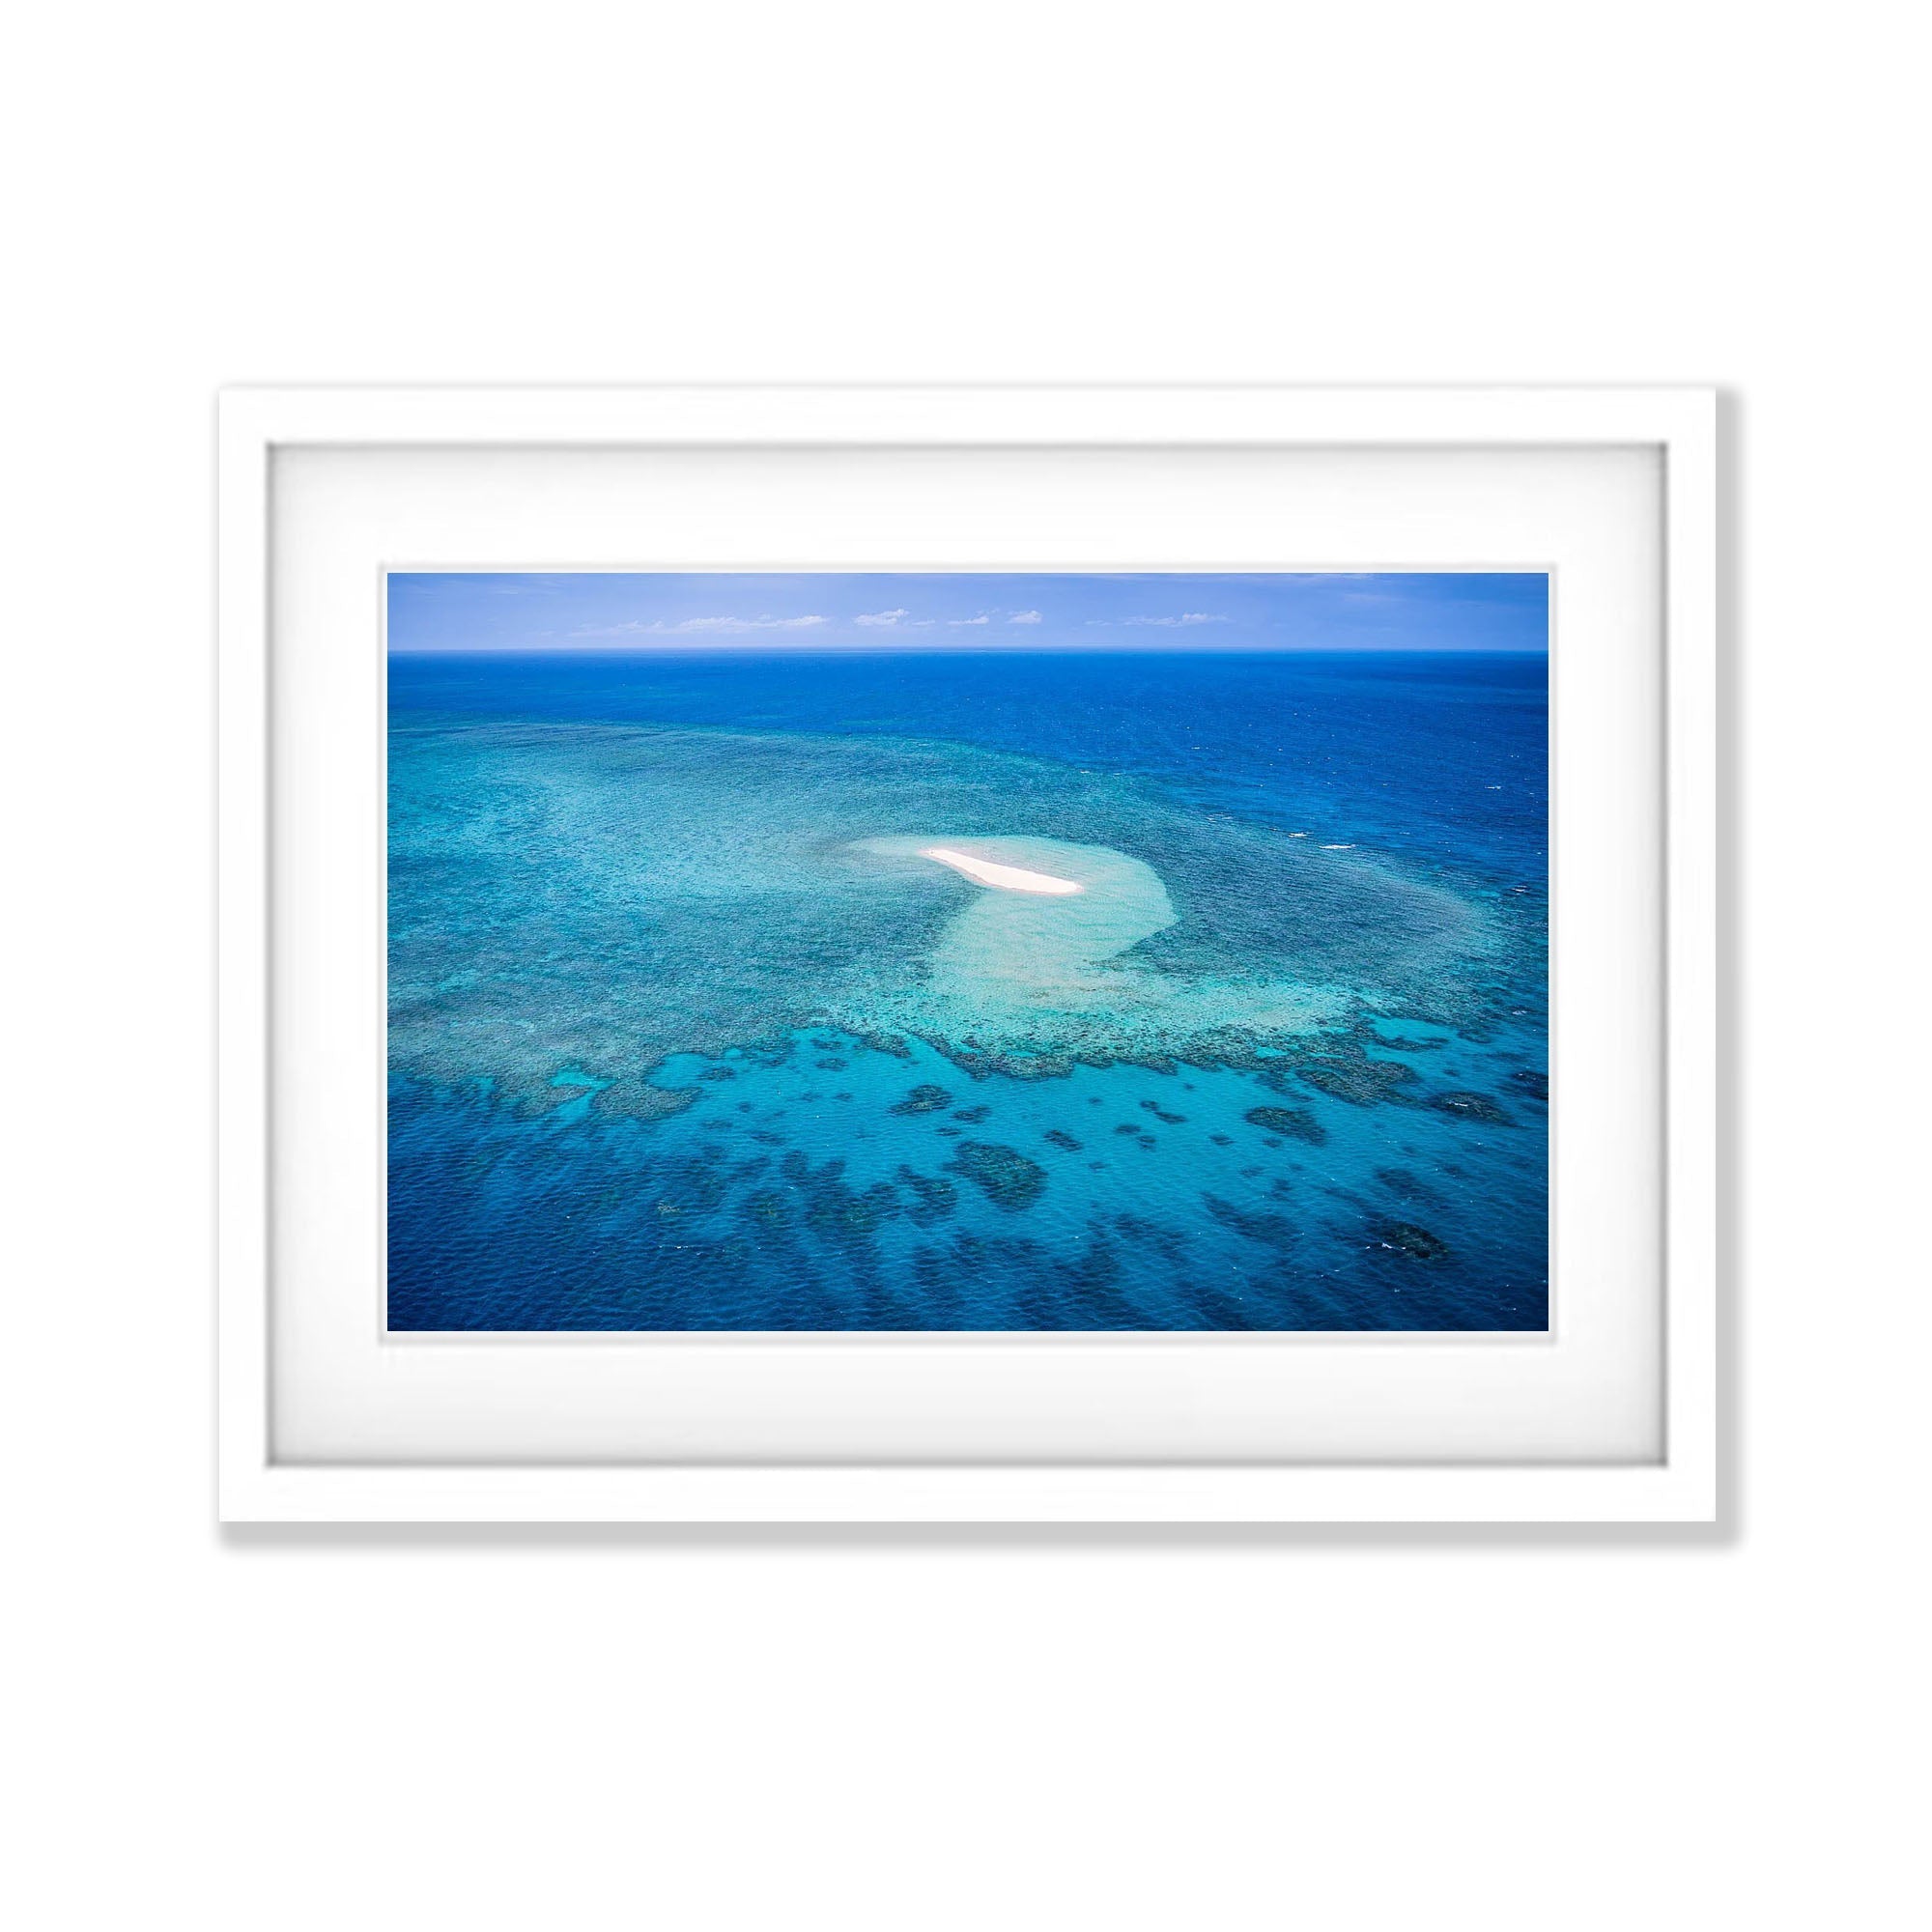 Remote Sandy Cay on the Great Barrier Reef, Far North Queensland